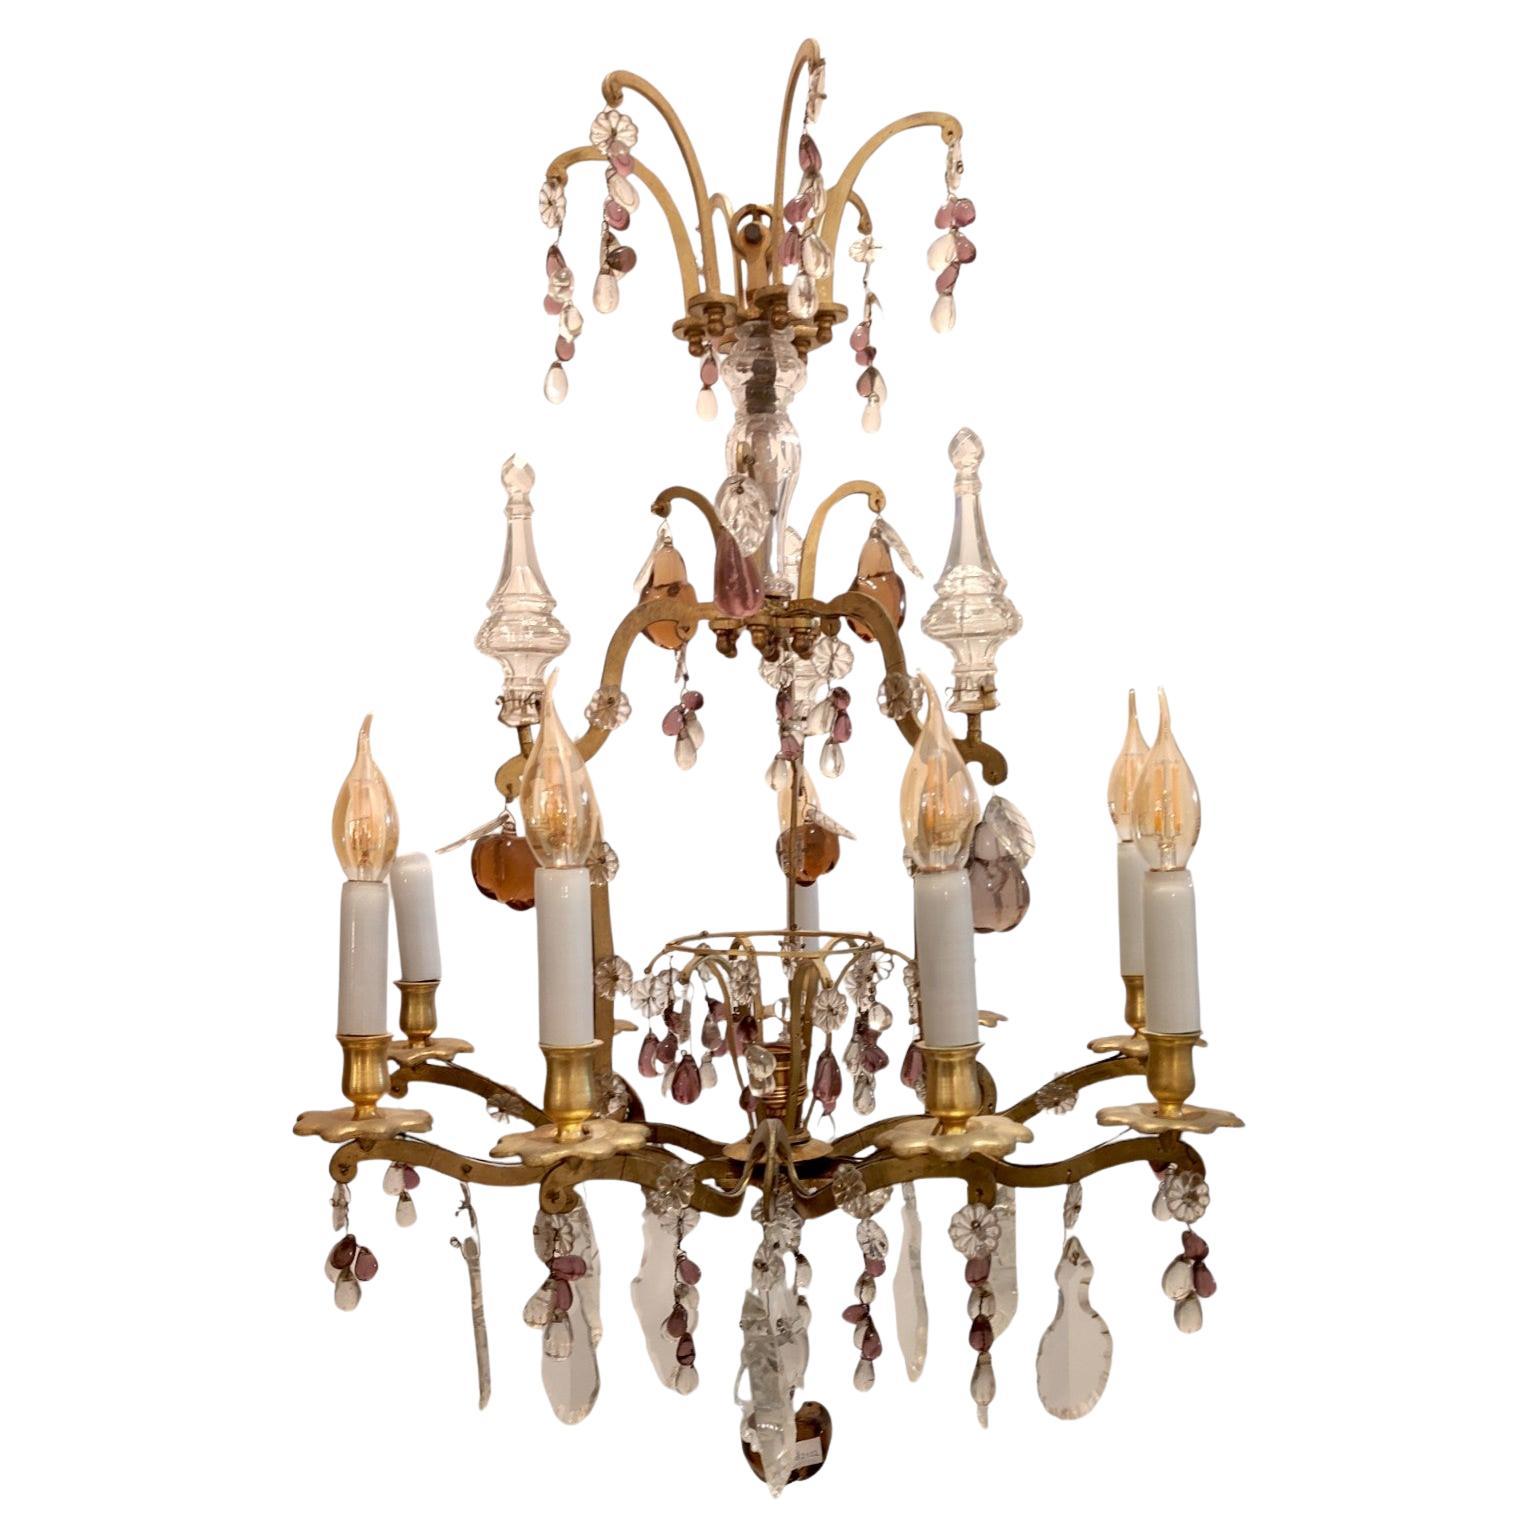 Crystal and Bronze Chandelier attr. to Maison Baguès, France, circa 1880